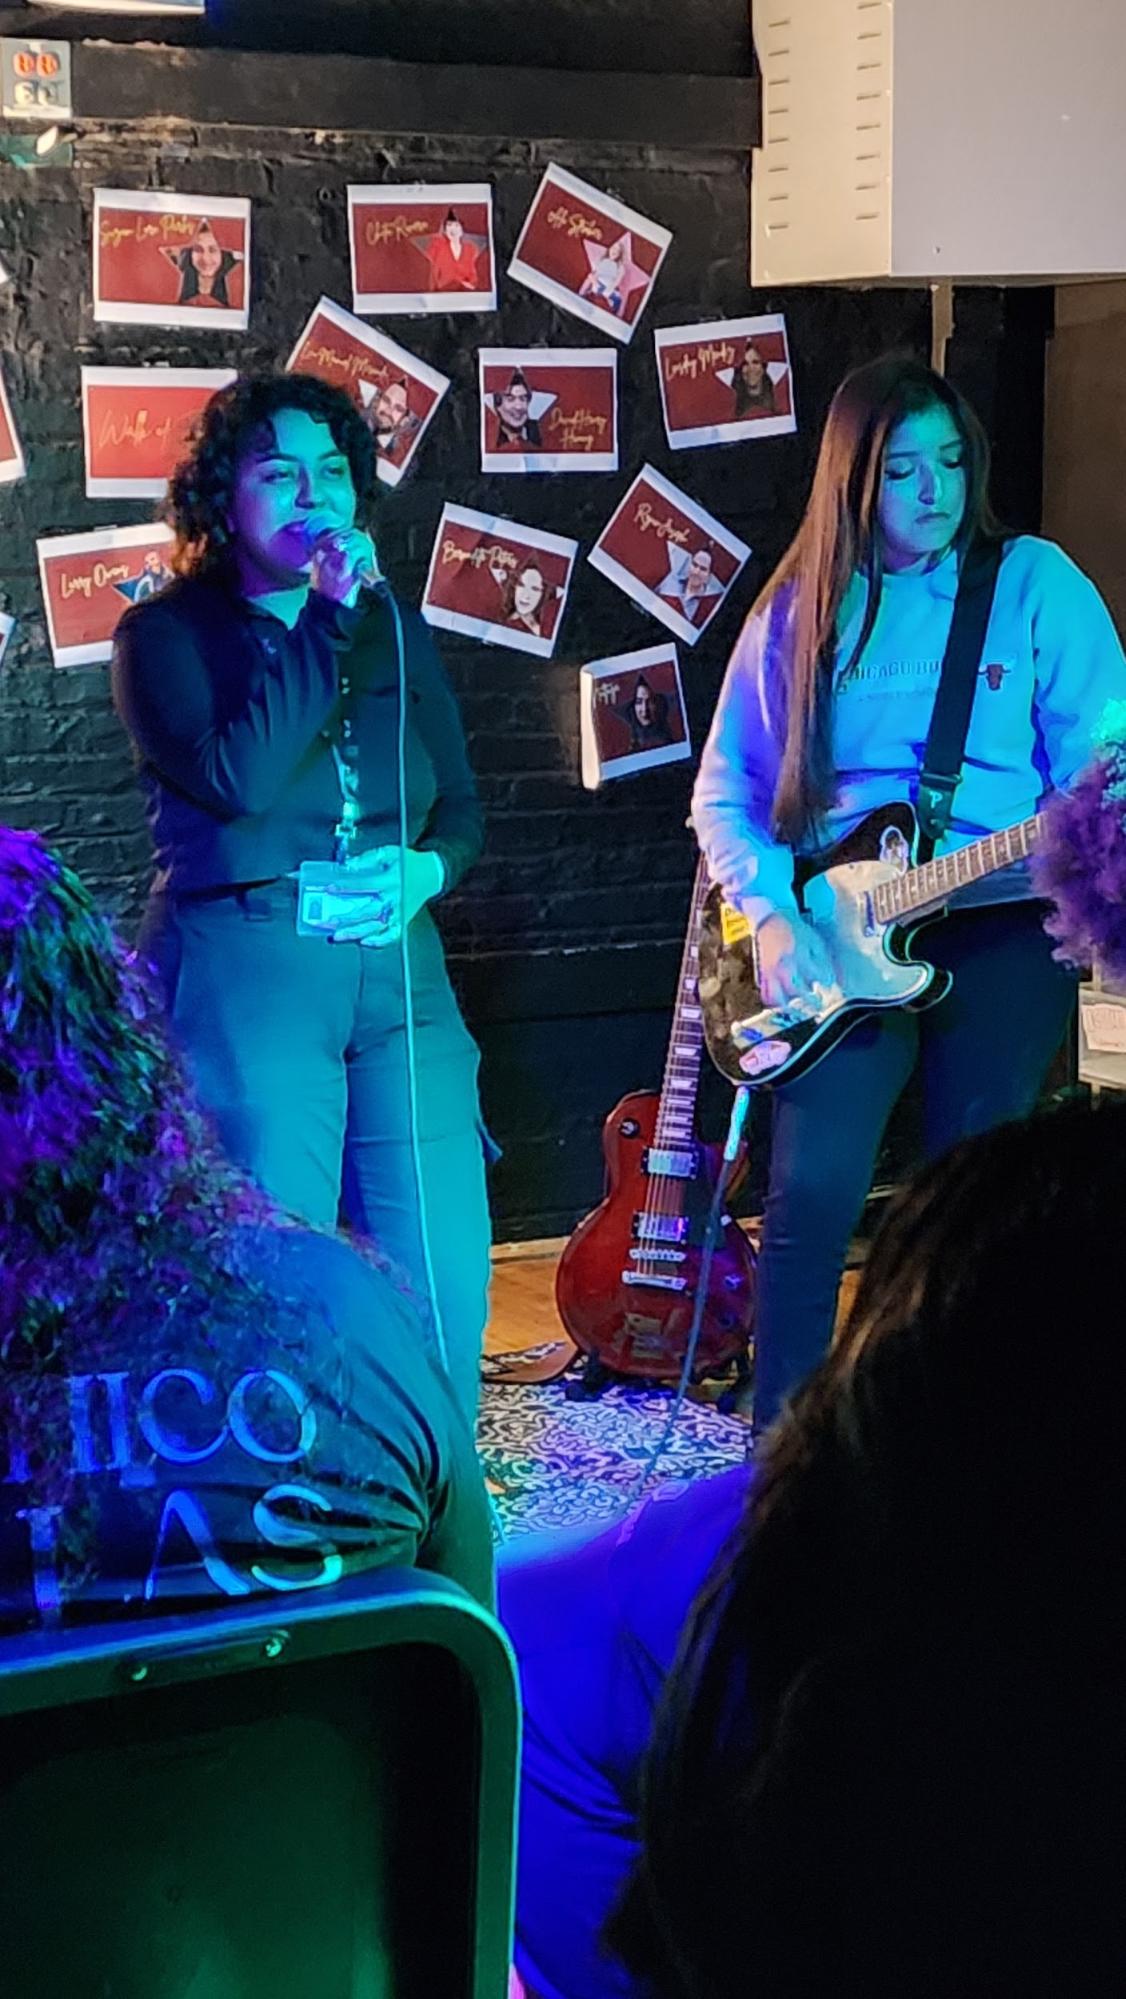 Students performing at open mic night. One is singing and wearing dark-colored clothing and the other is playing the guitar. A blue light is shining on both students.